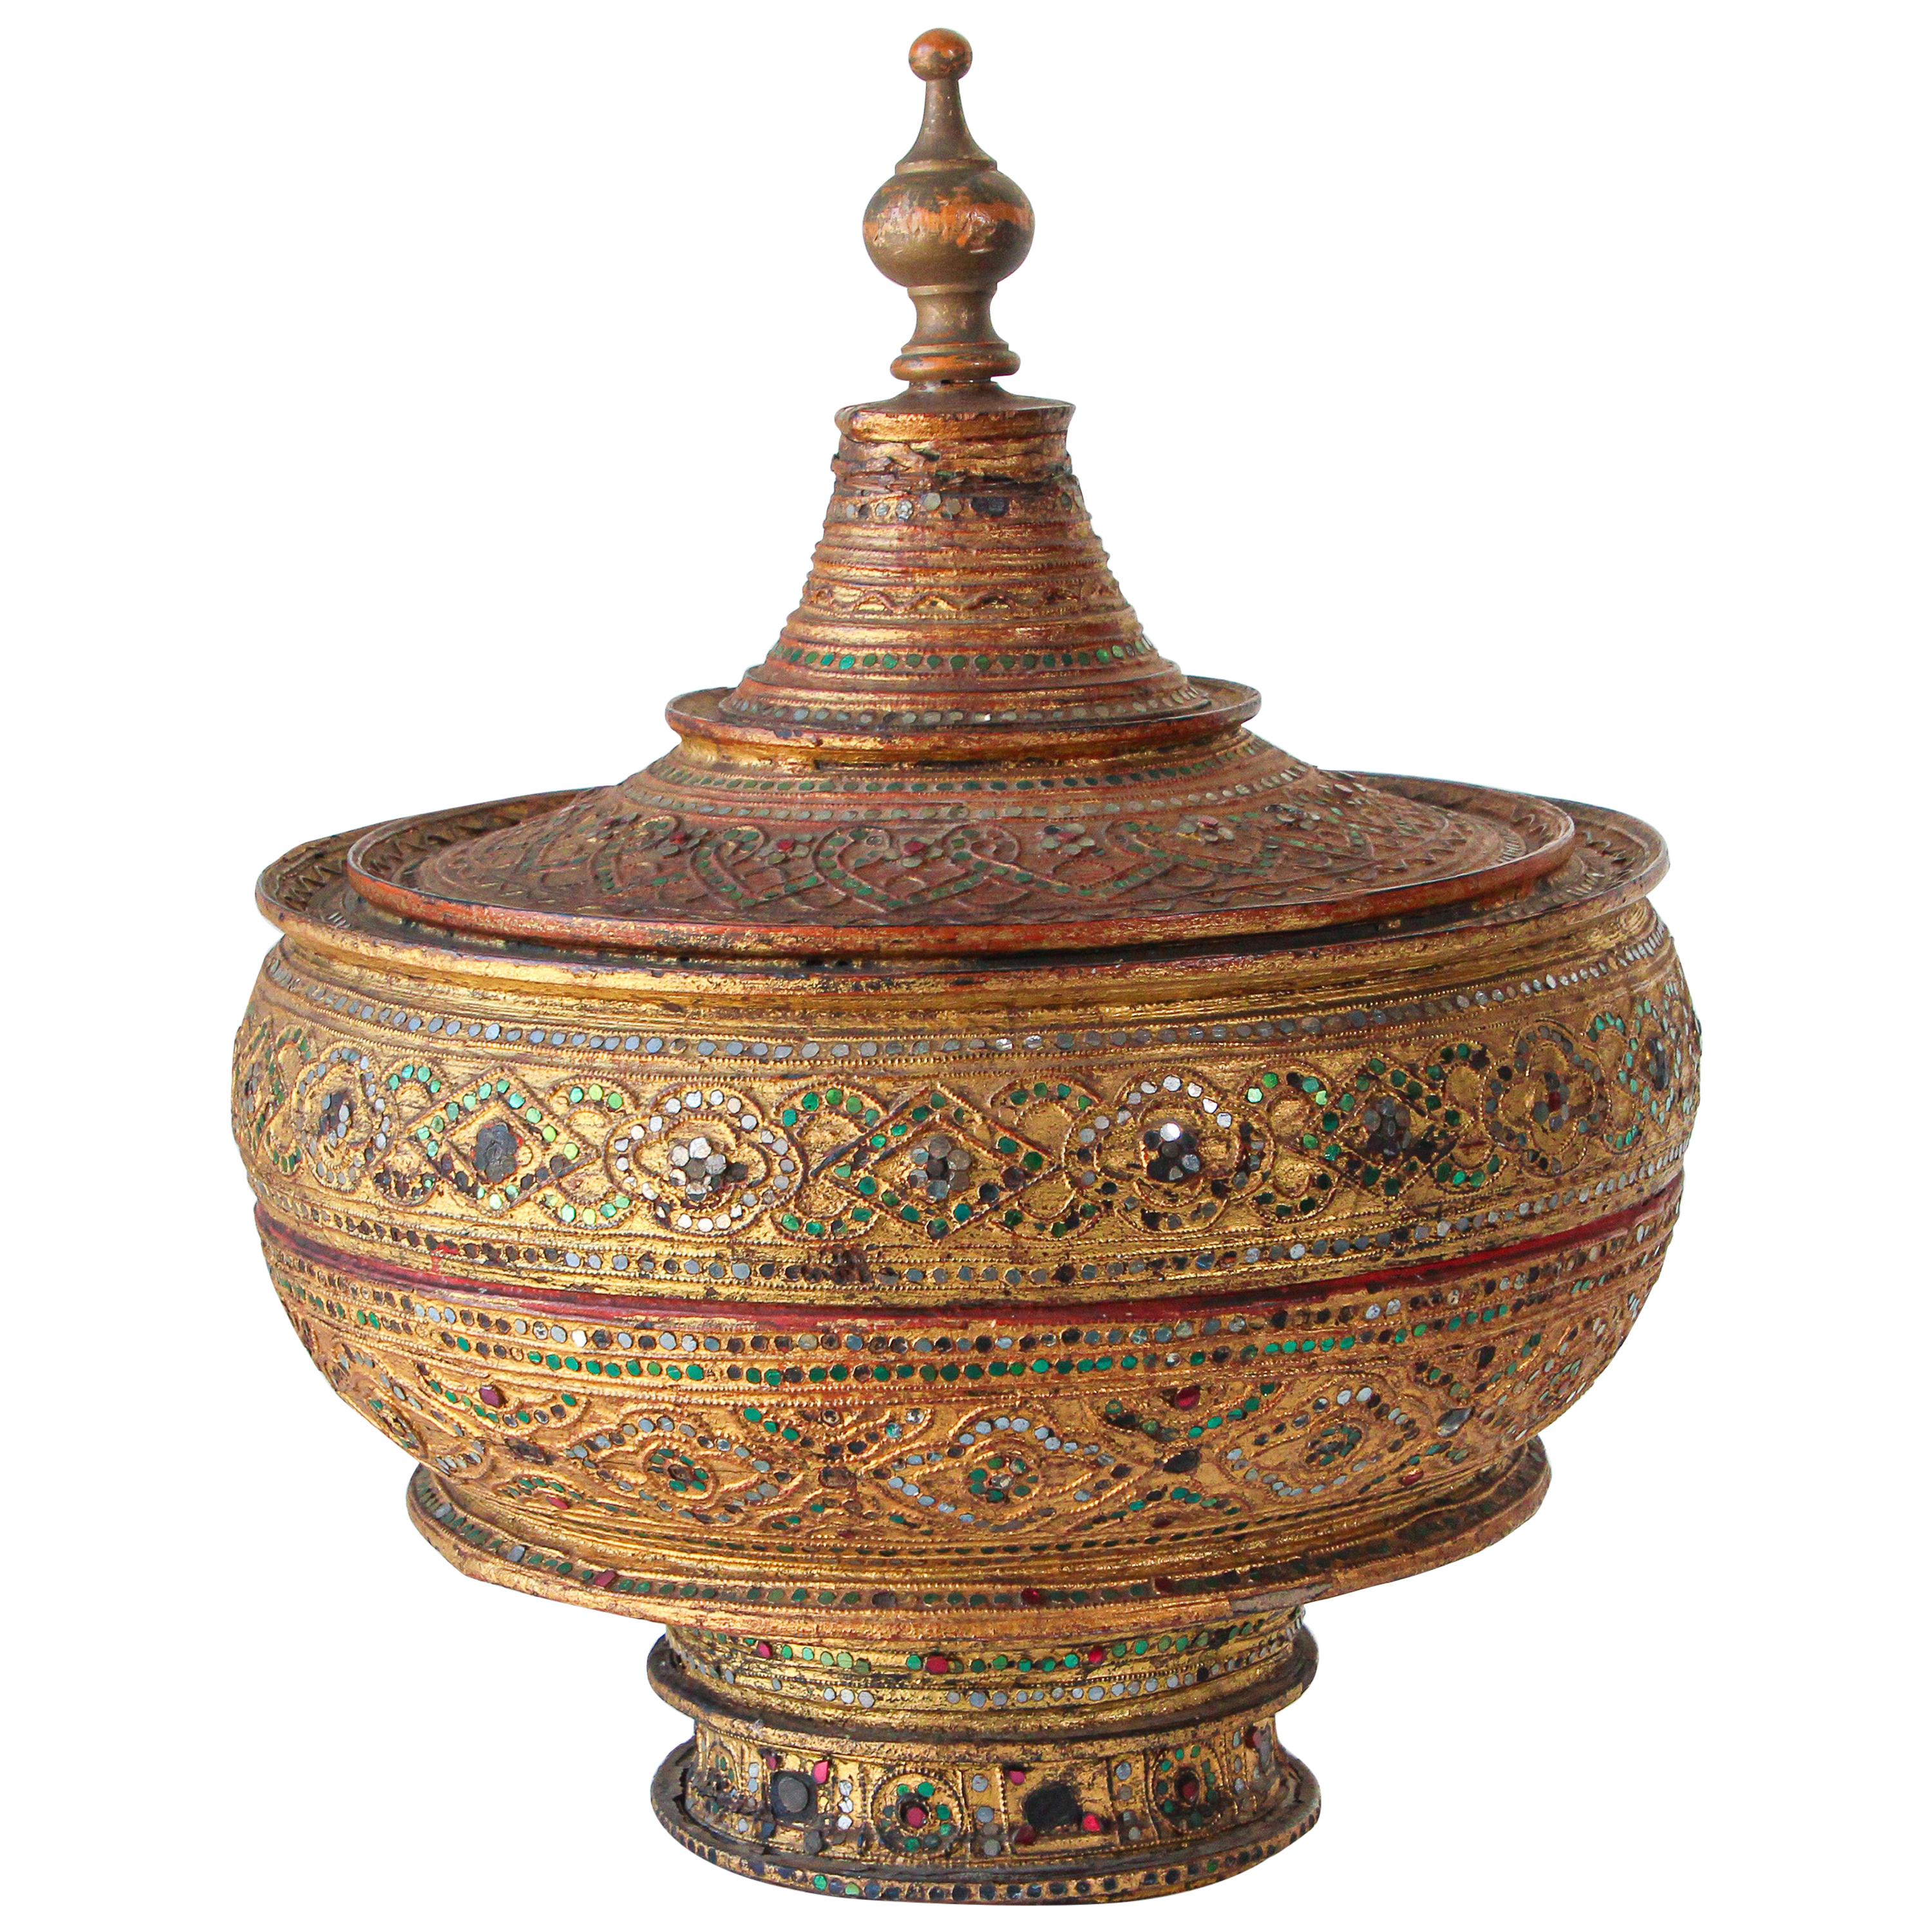 Large Burmese Gilt and Lacquered Wood Temple Offering Basket